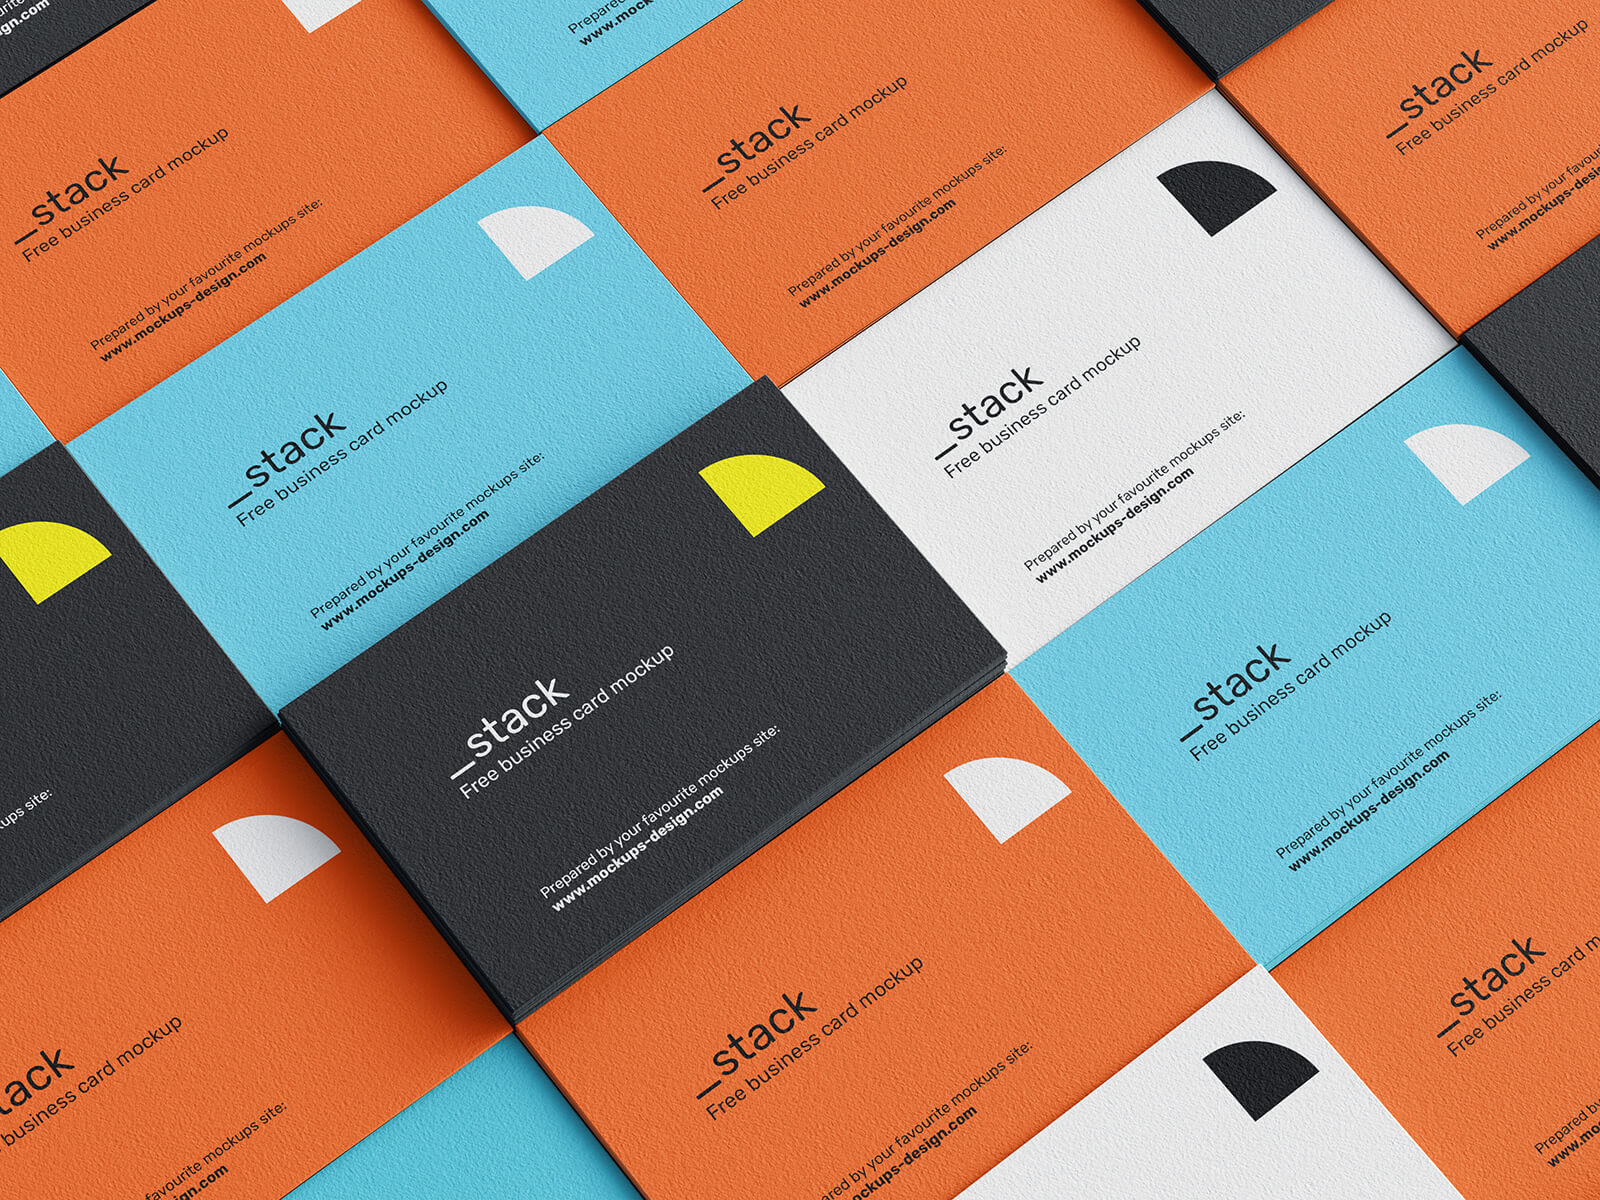 4 Free Stacked Business Cards Mockup PSD